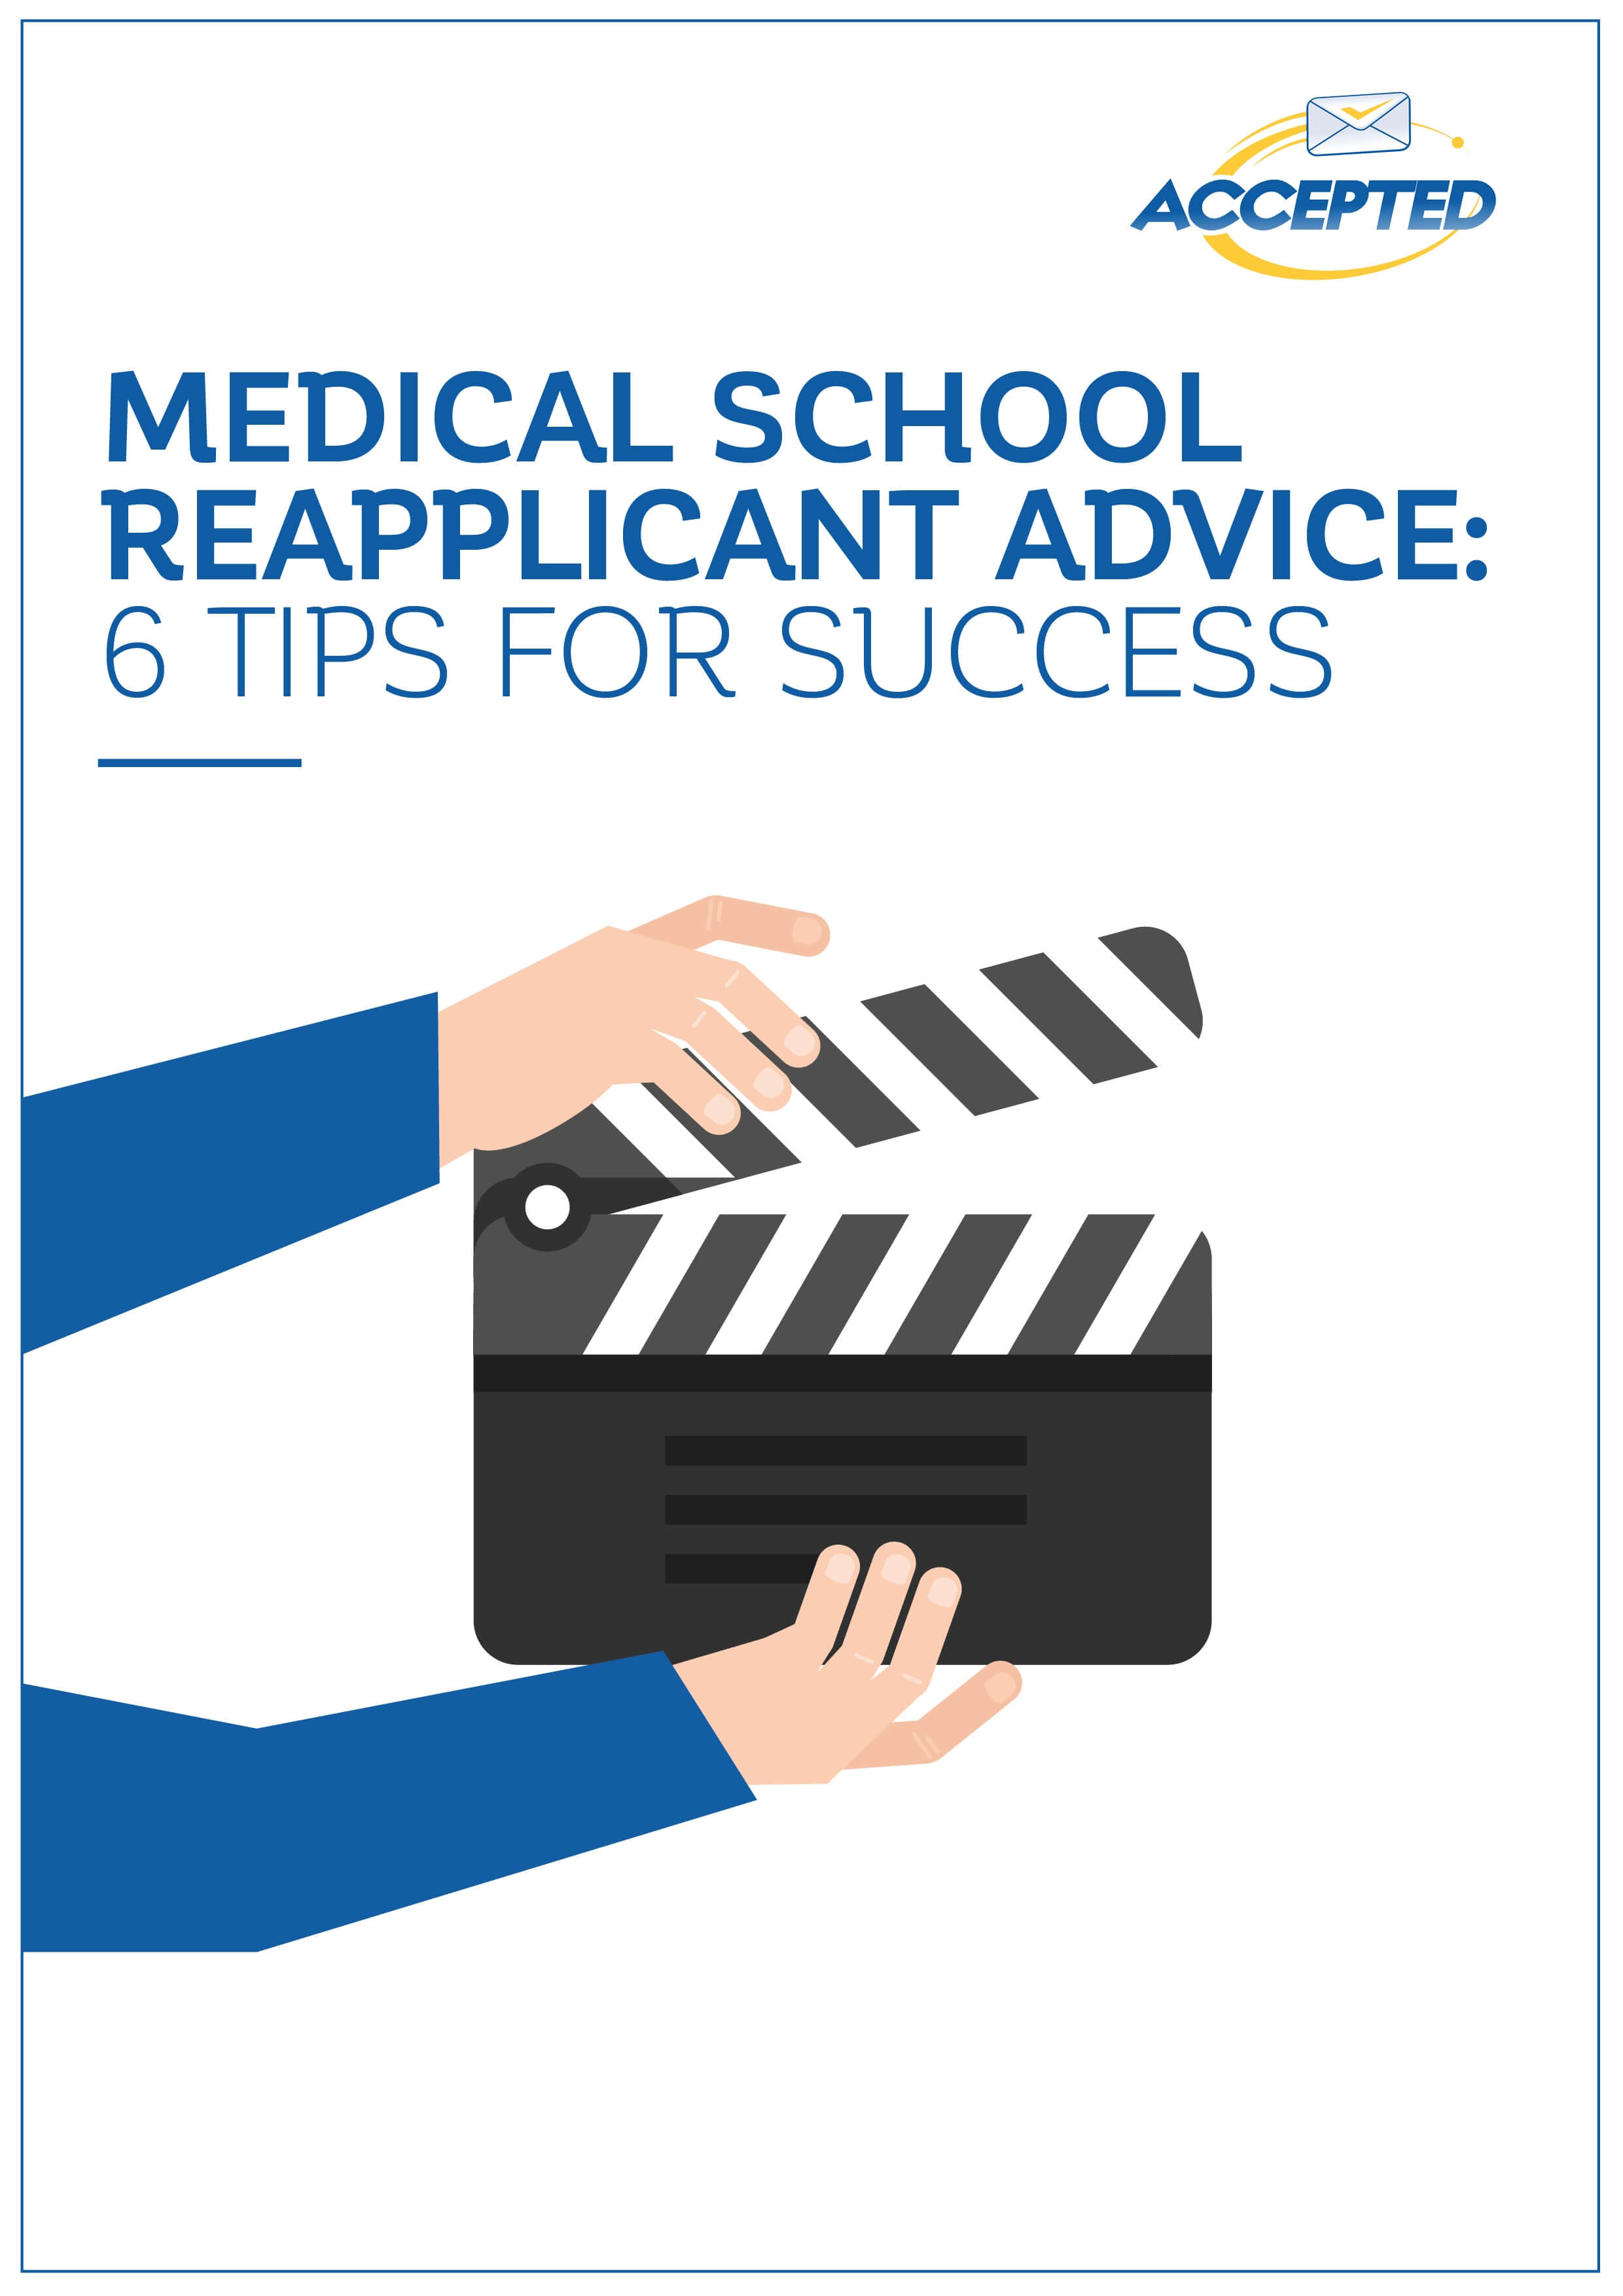 Medical School Reapplicant Advice: 6 Tips for Success